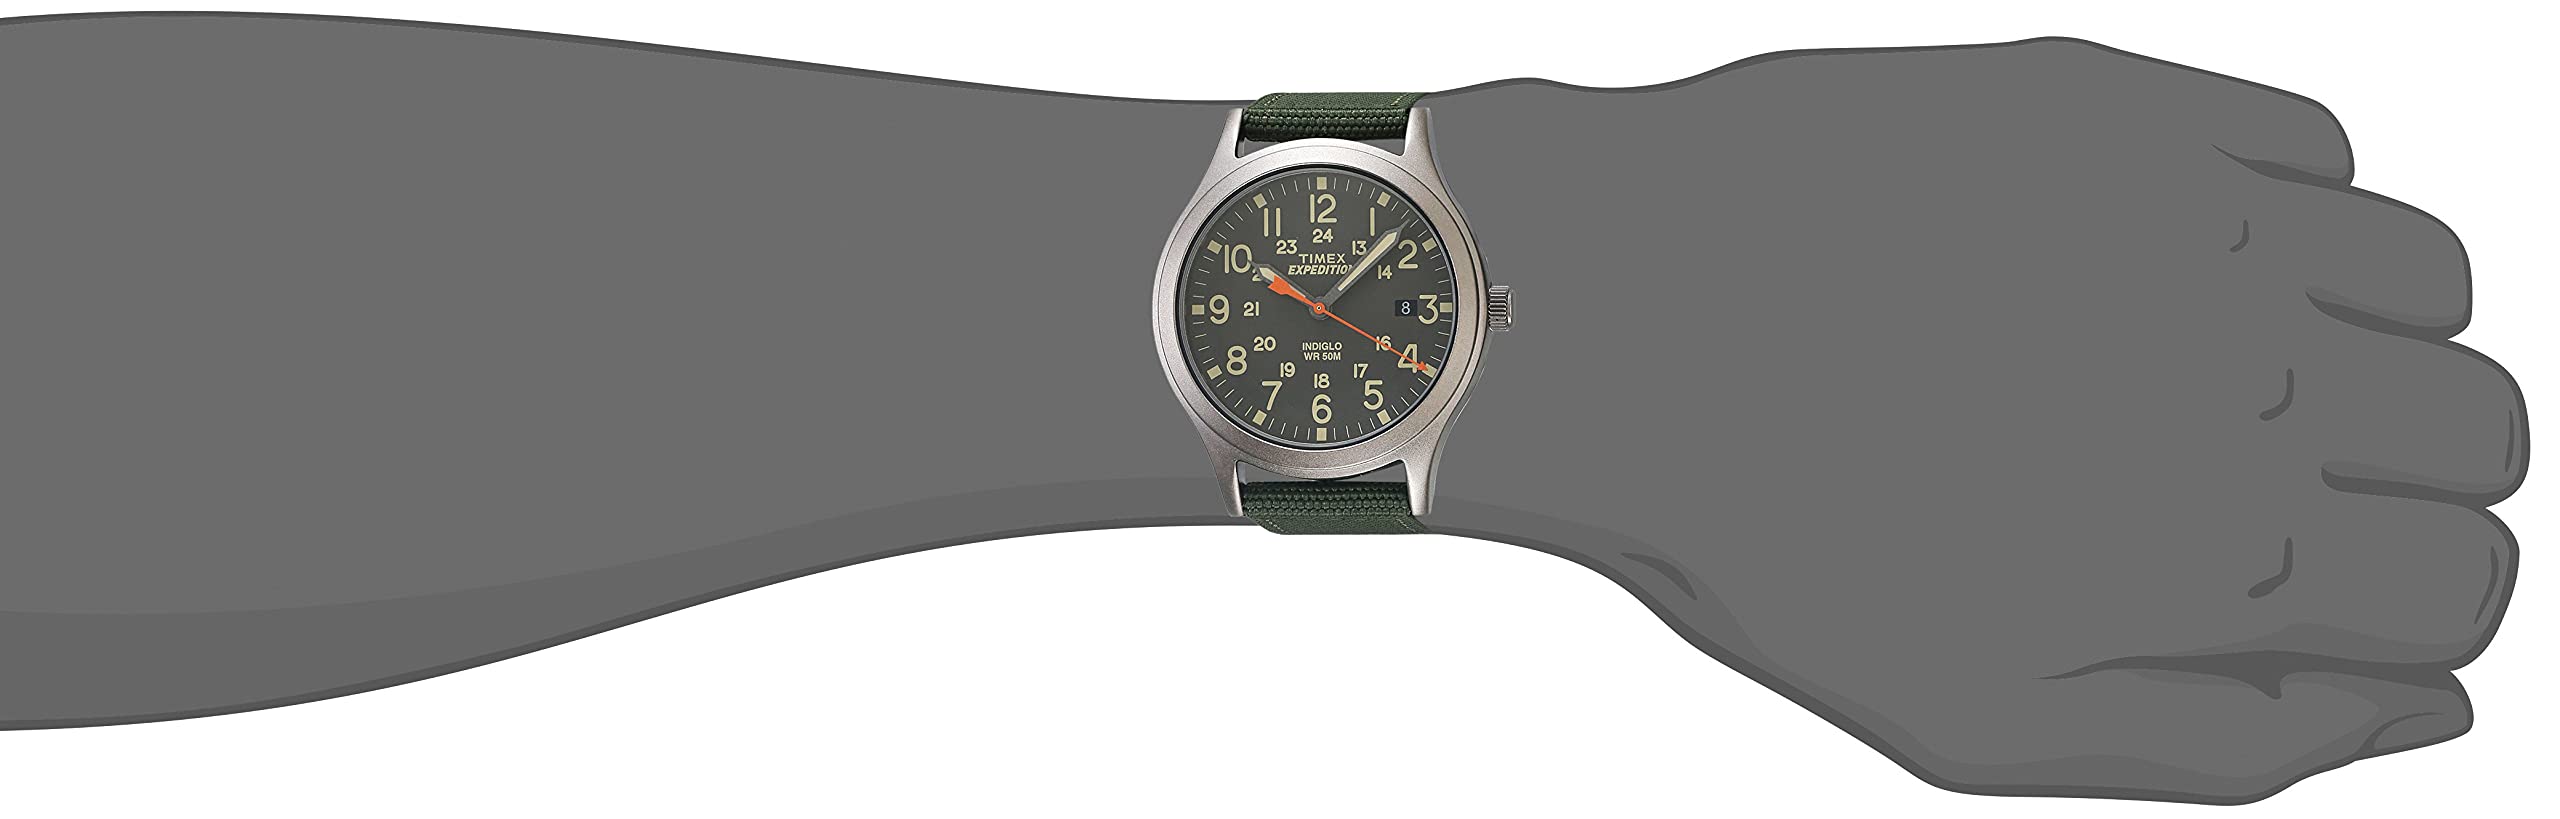 Timex Unisex TW4B13900 Expedition Scout 36mm Green/Black Nylon Strap Watch